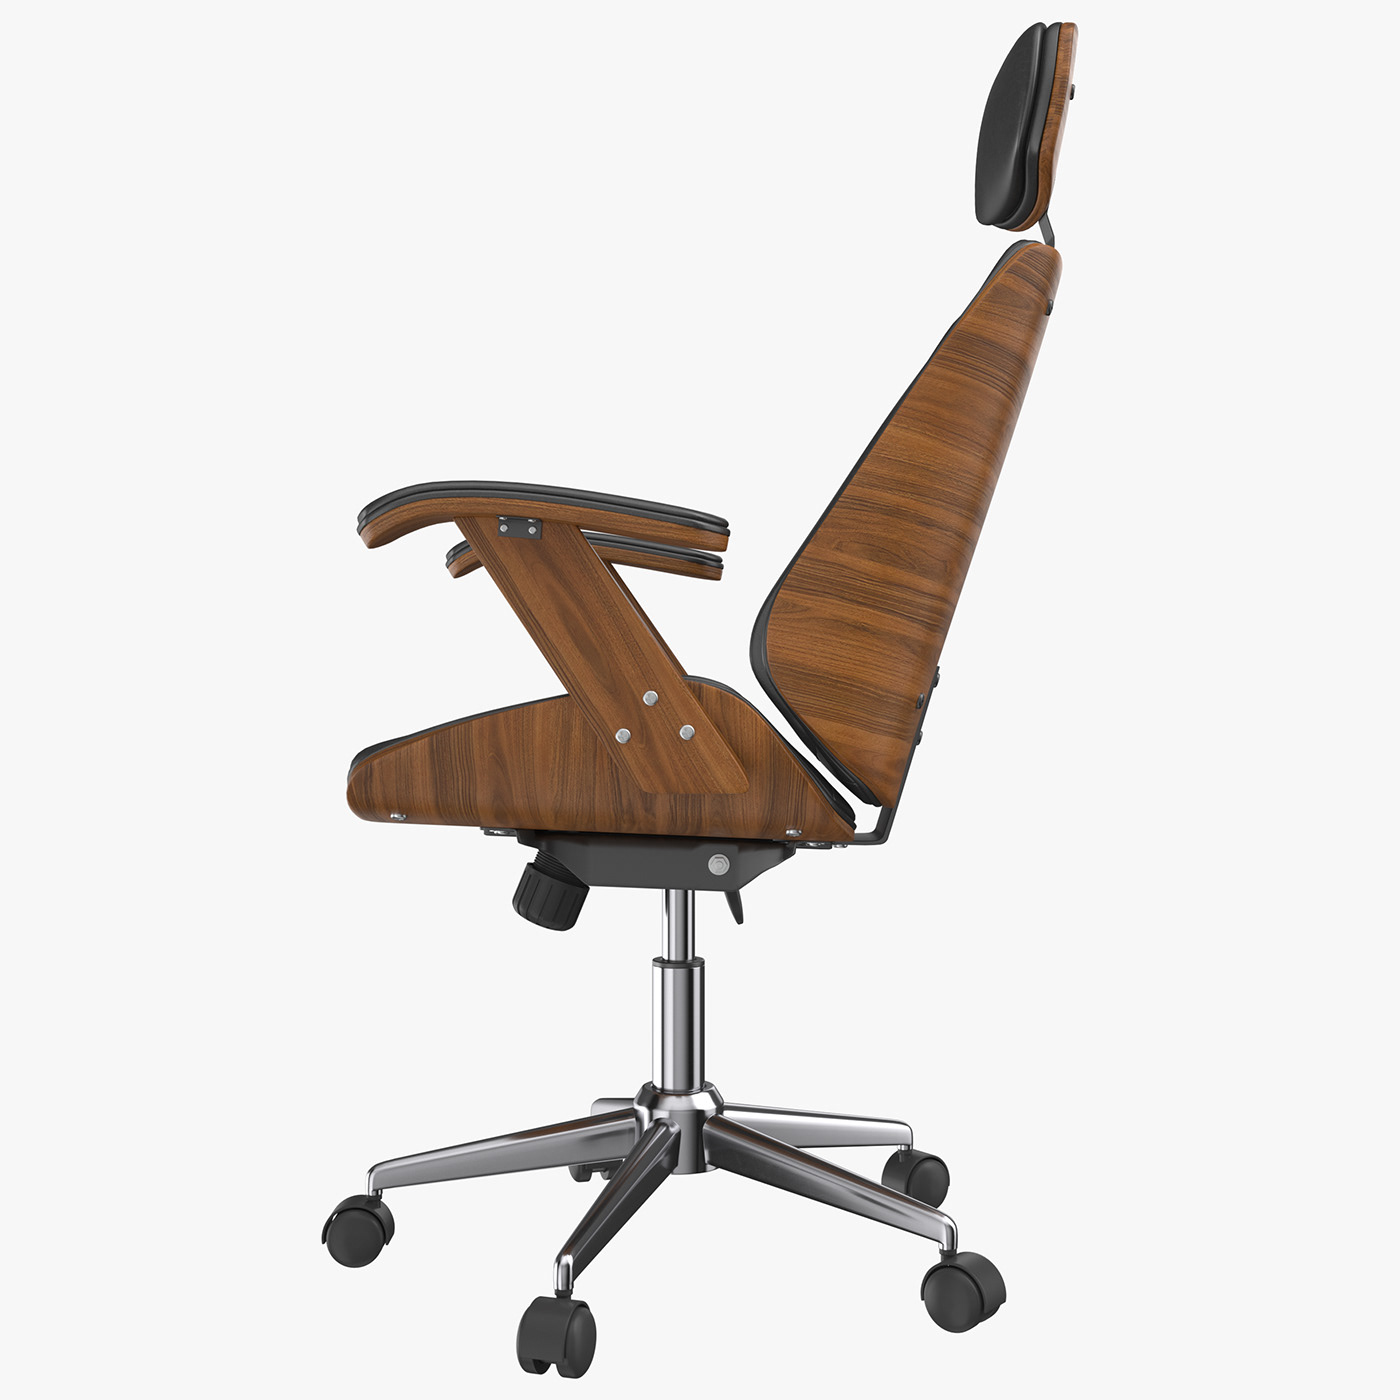 3D 3d modeling 3ds max CGI chair design office furniture Render visualization vray